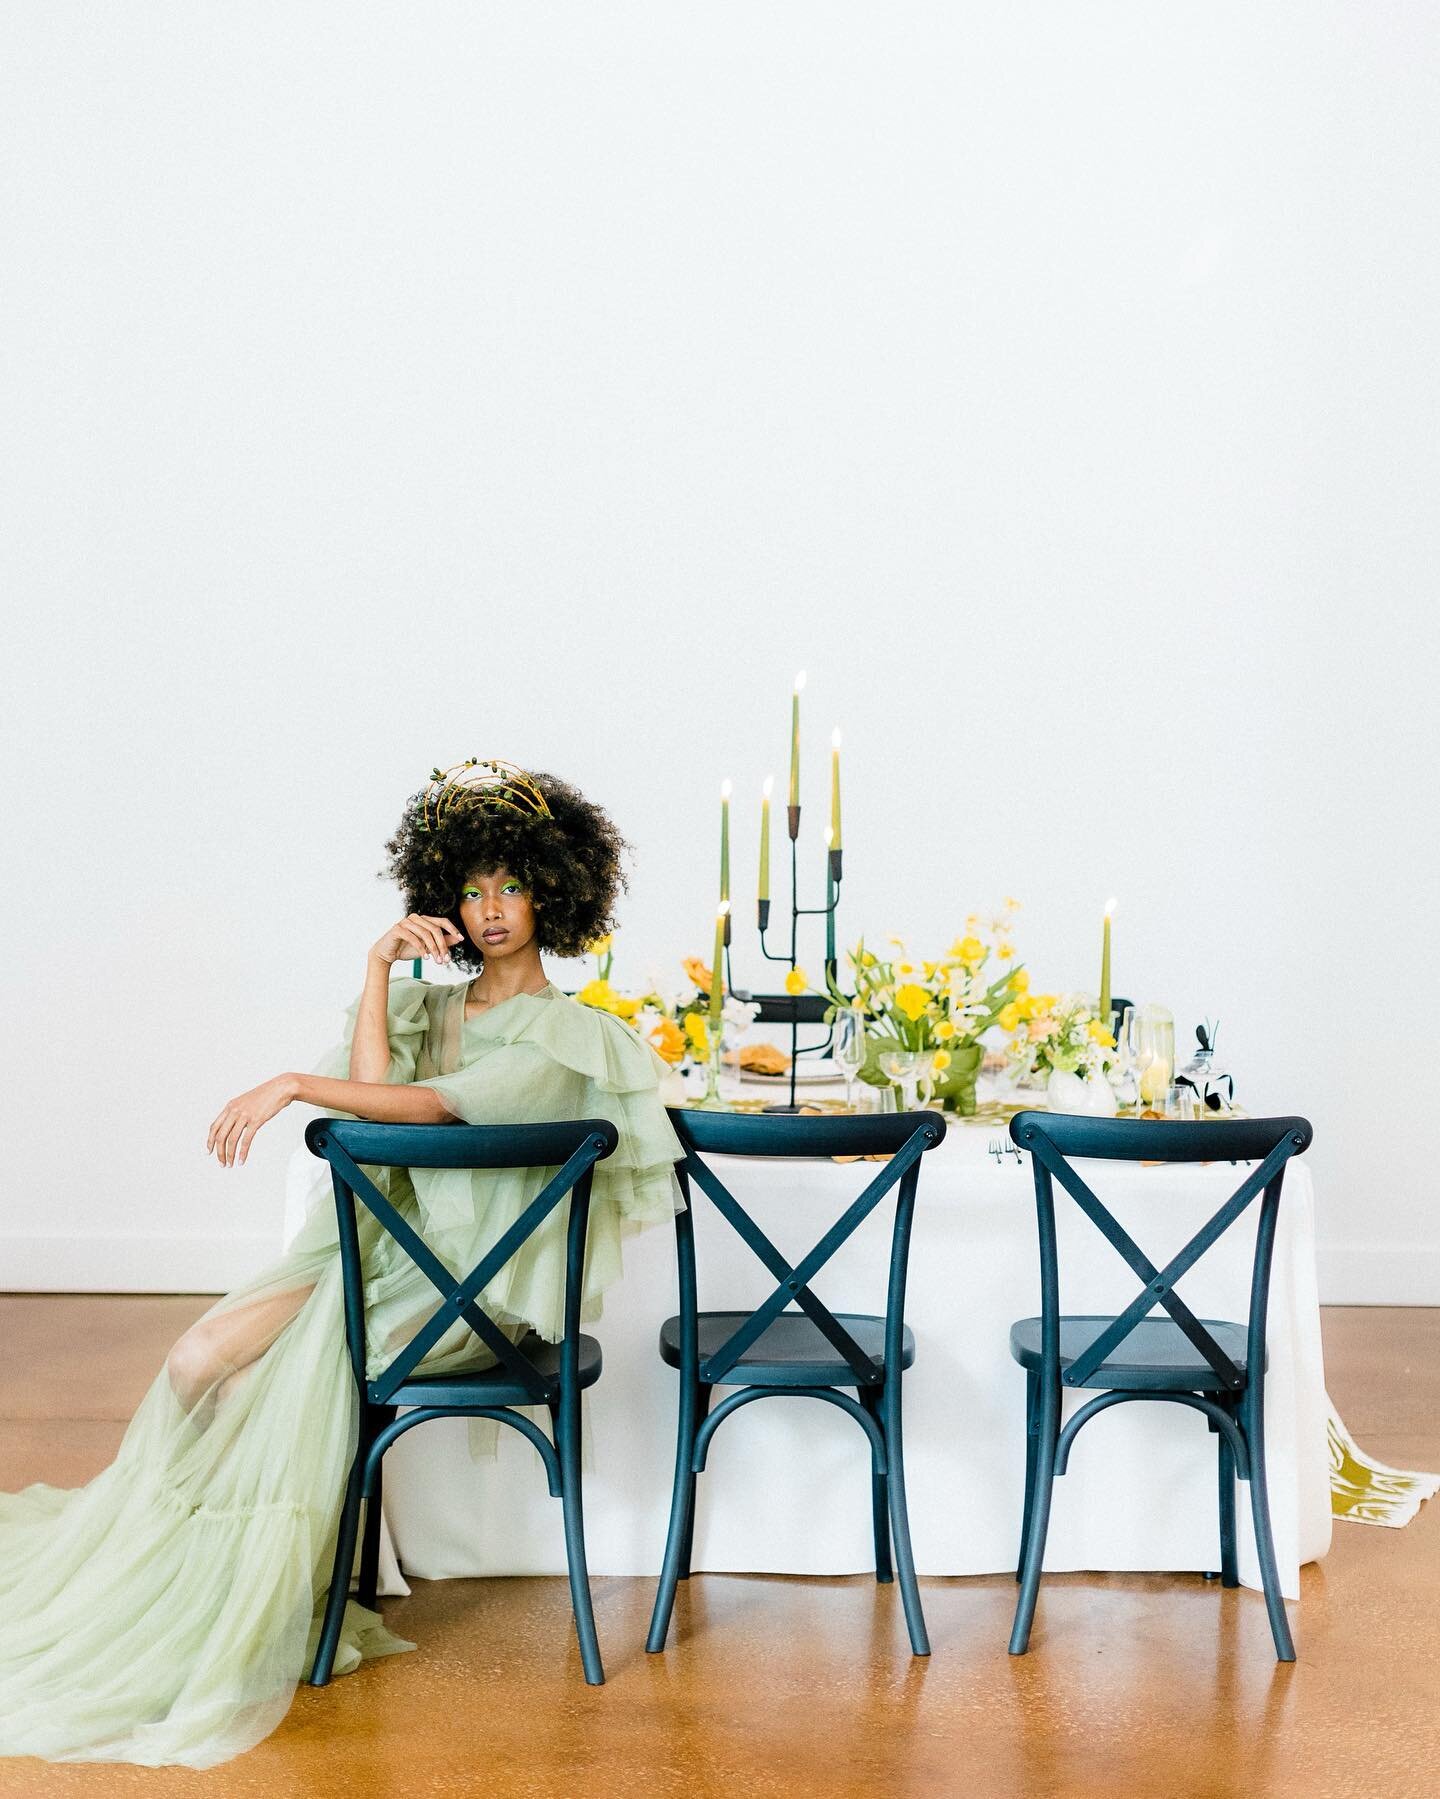 Happy Wednesday from Studio V + V 💚 get your Fall events booked now!

Styled Shoot Gang:
Venue: @studiovandv
Planner: @somethingborrowedeventco 
Photographer: @opalandonyxphotography
Videographer: @midnightembersfilms
Floral &amp; Concept Design : @